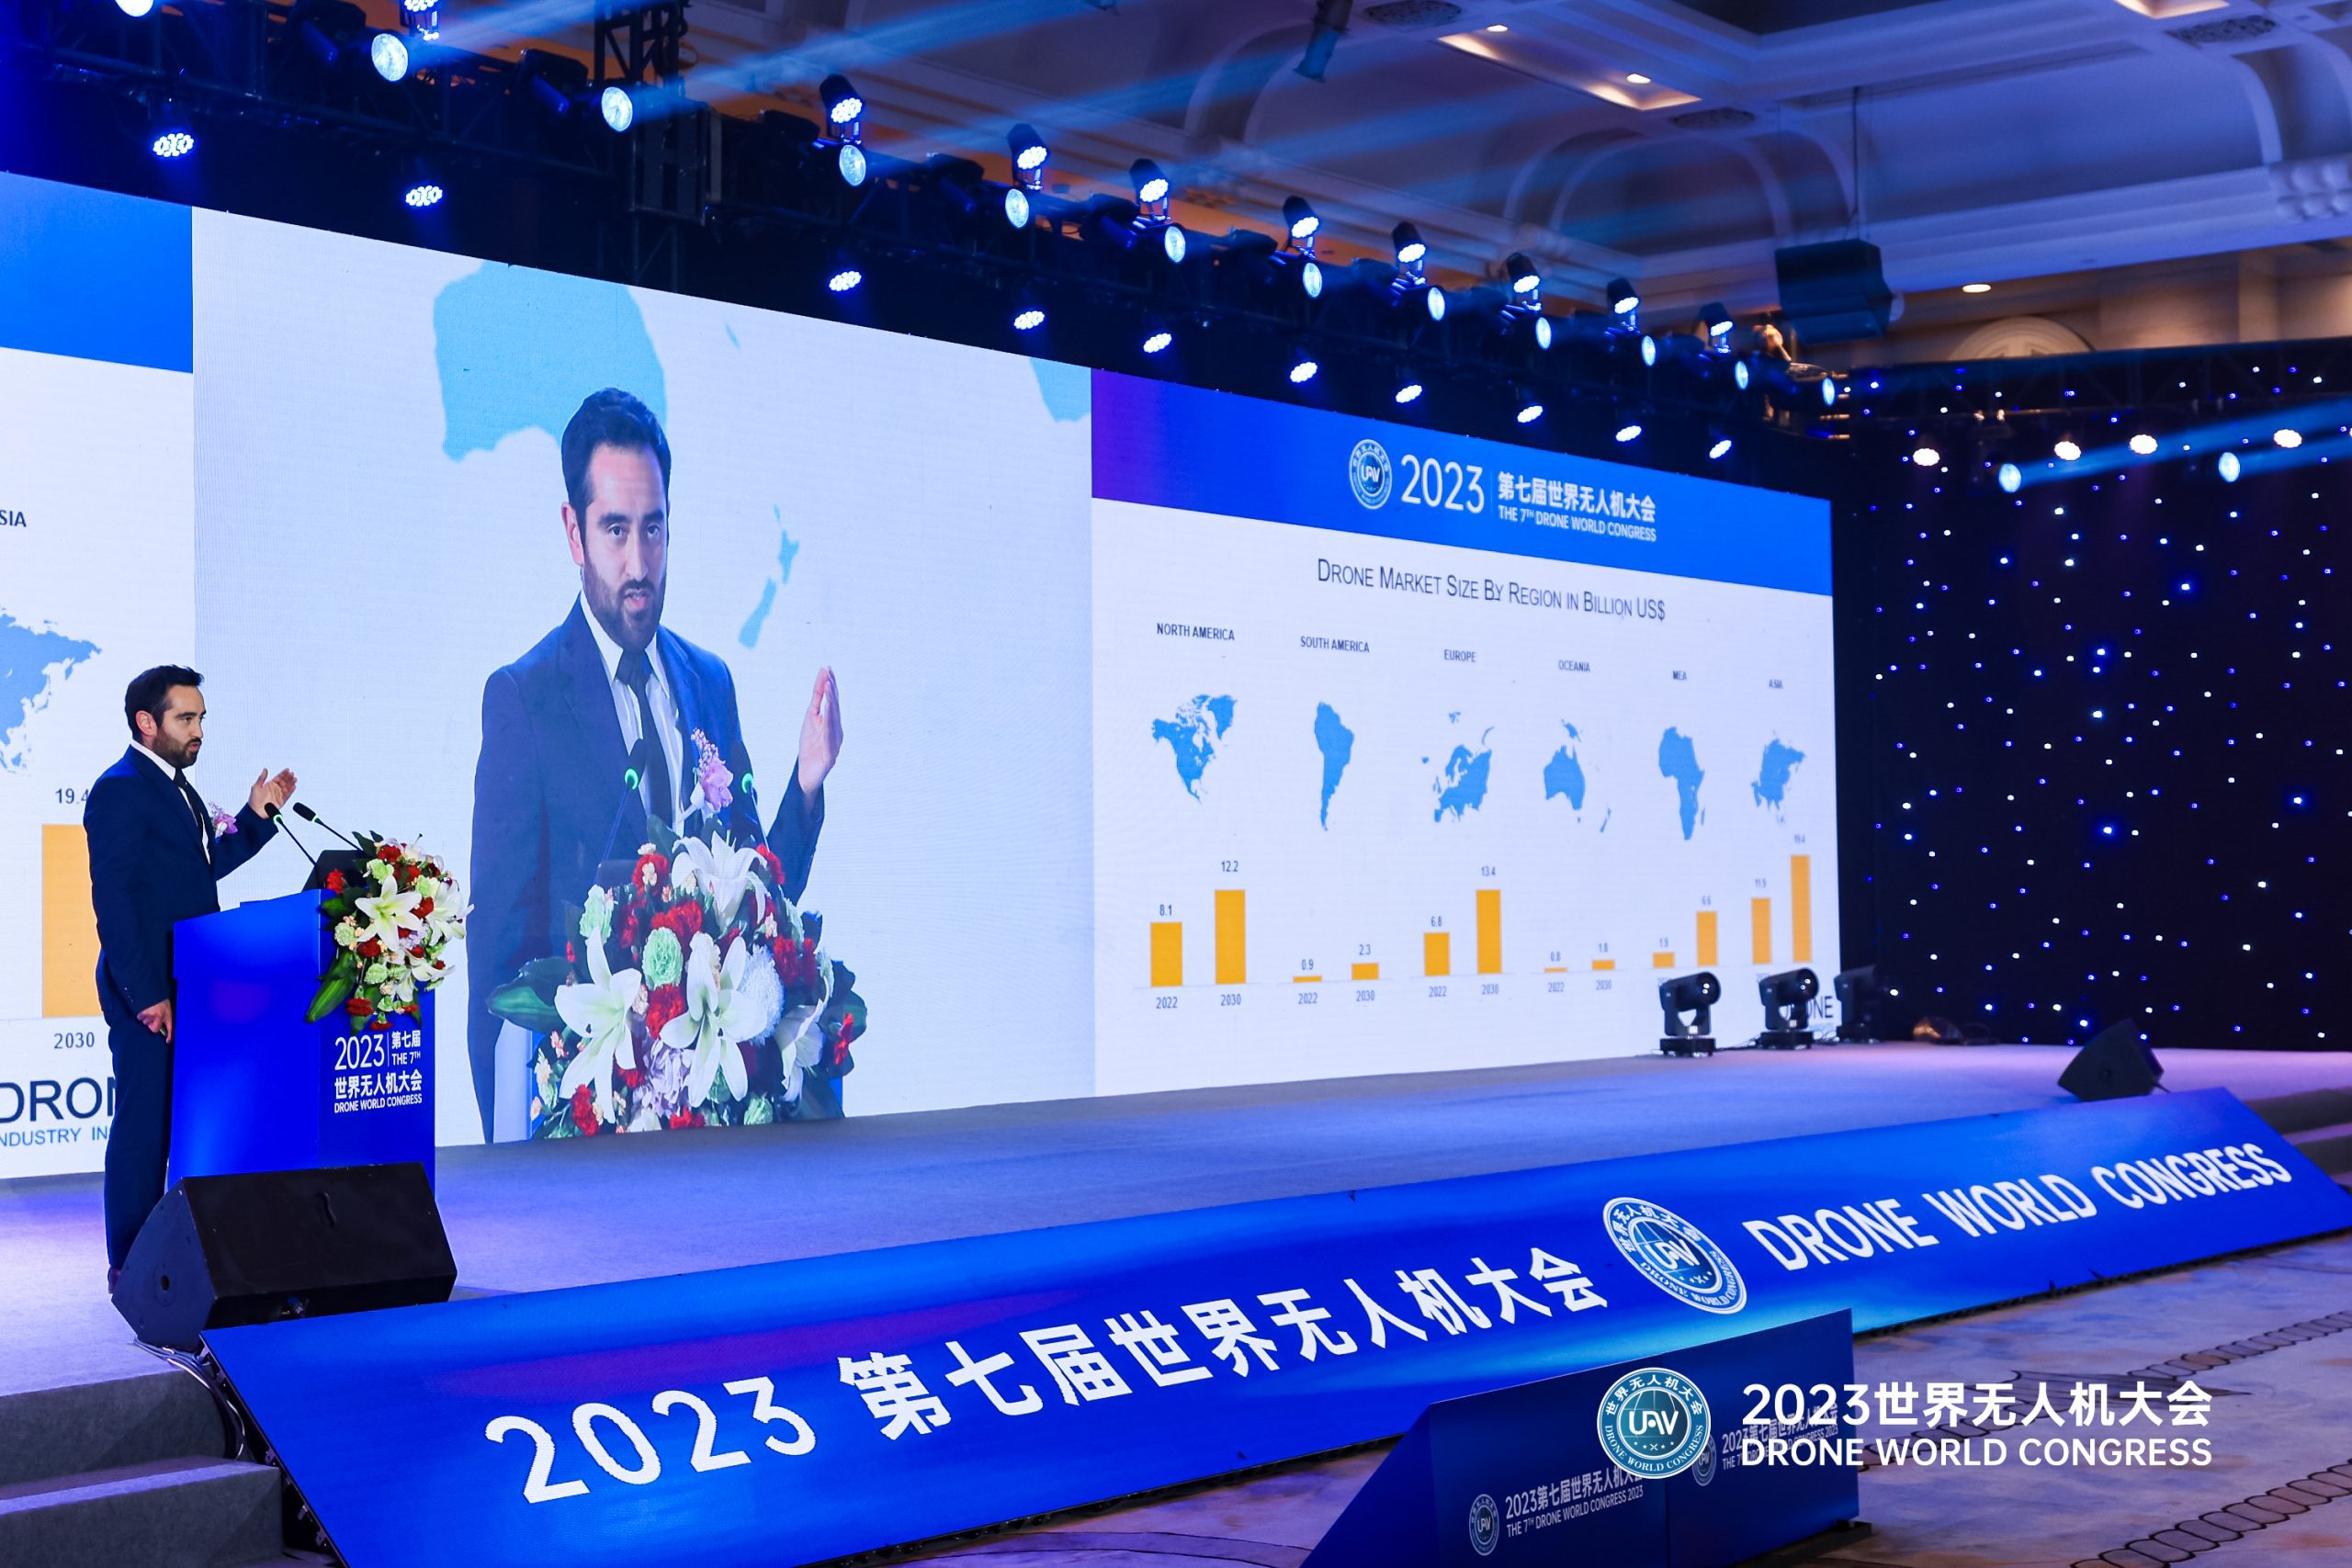 Ed stage Drone World Congress 2023